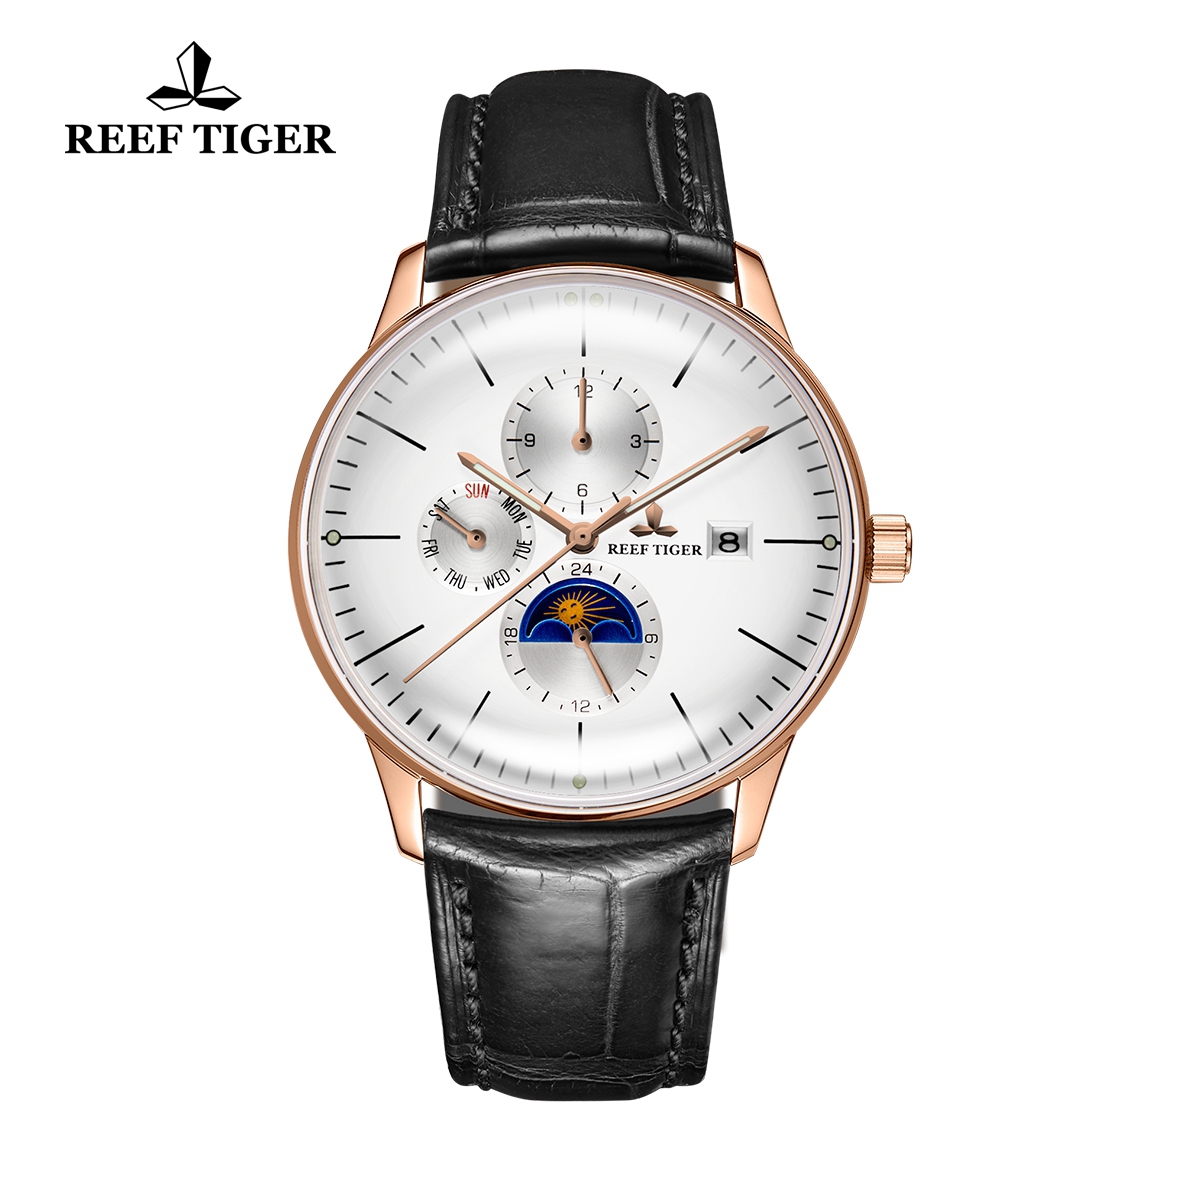 Reef Tiger Seattle Philosopher Rose Gold Convex Lens Genuine Leather Automatic with Date Day Watch RGA1653-PWB